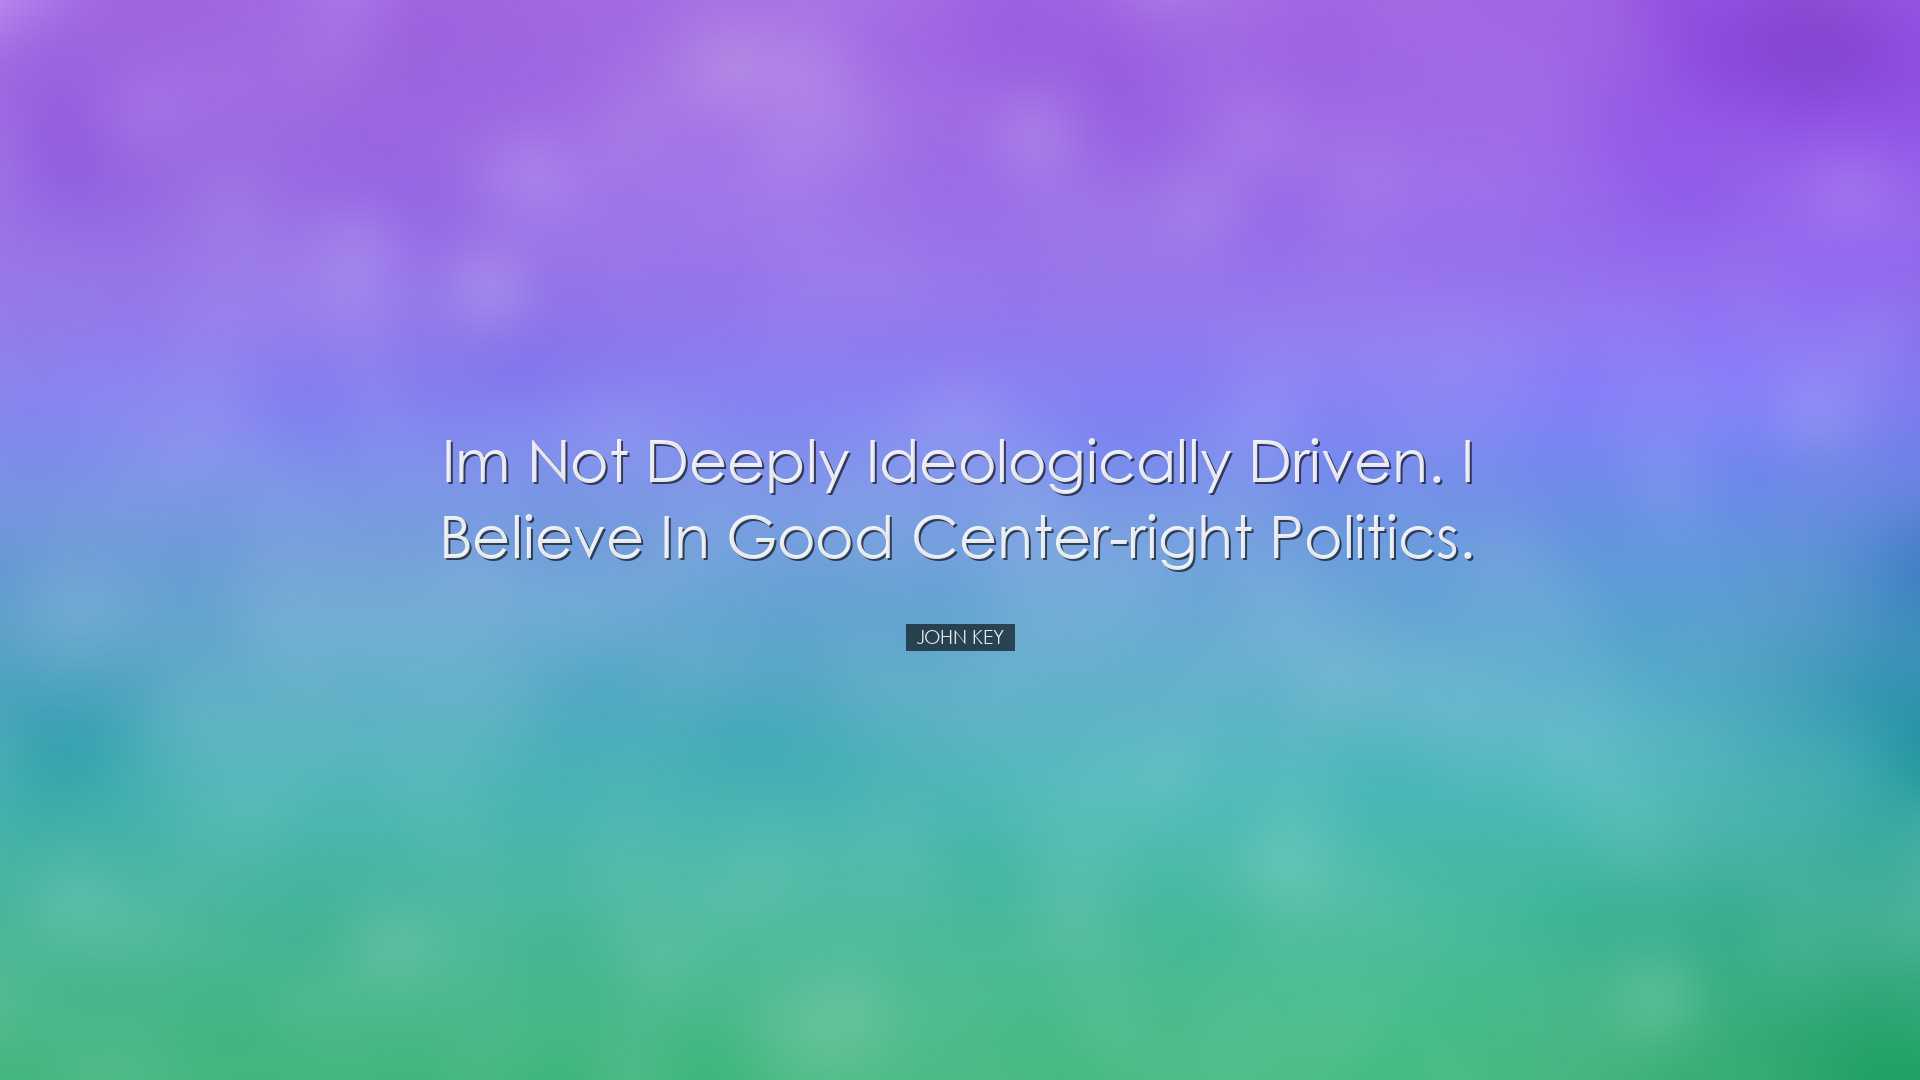 Im not deeply ideologically driven. I believe in good center-right